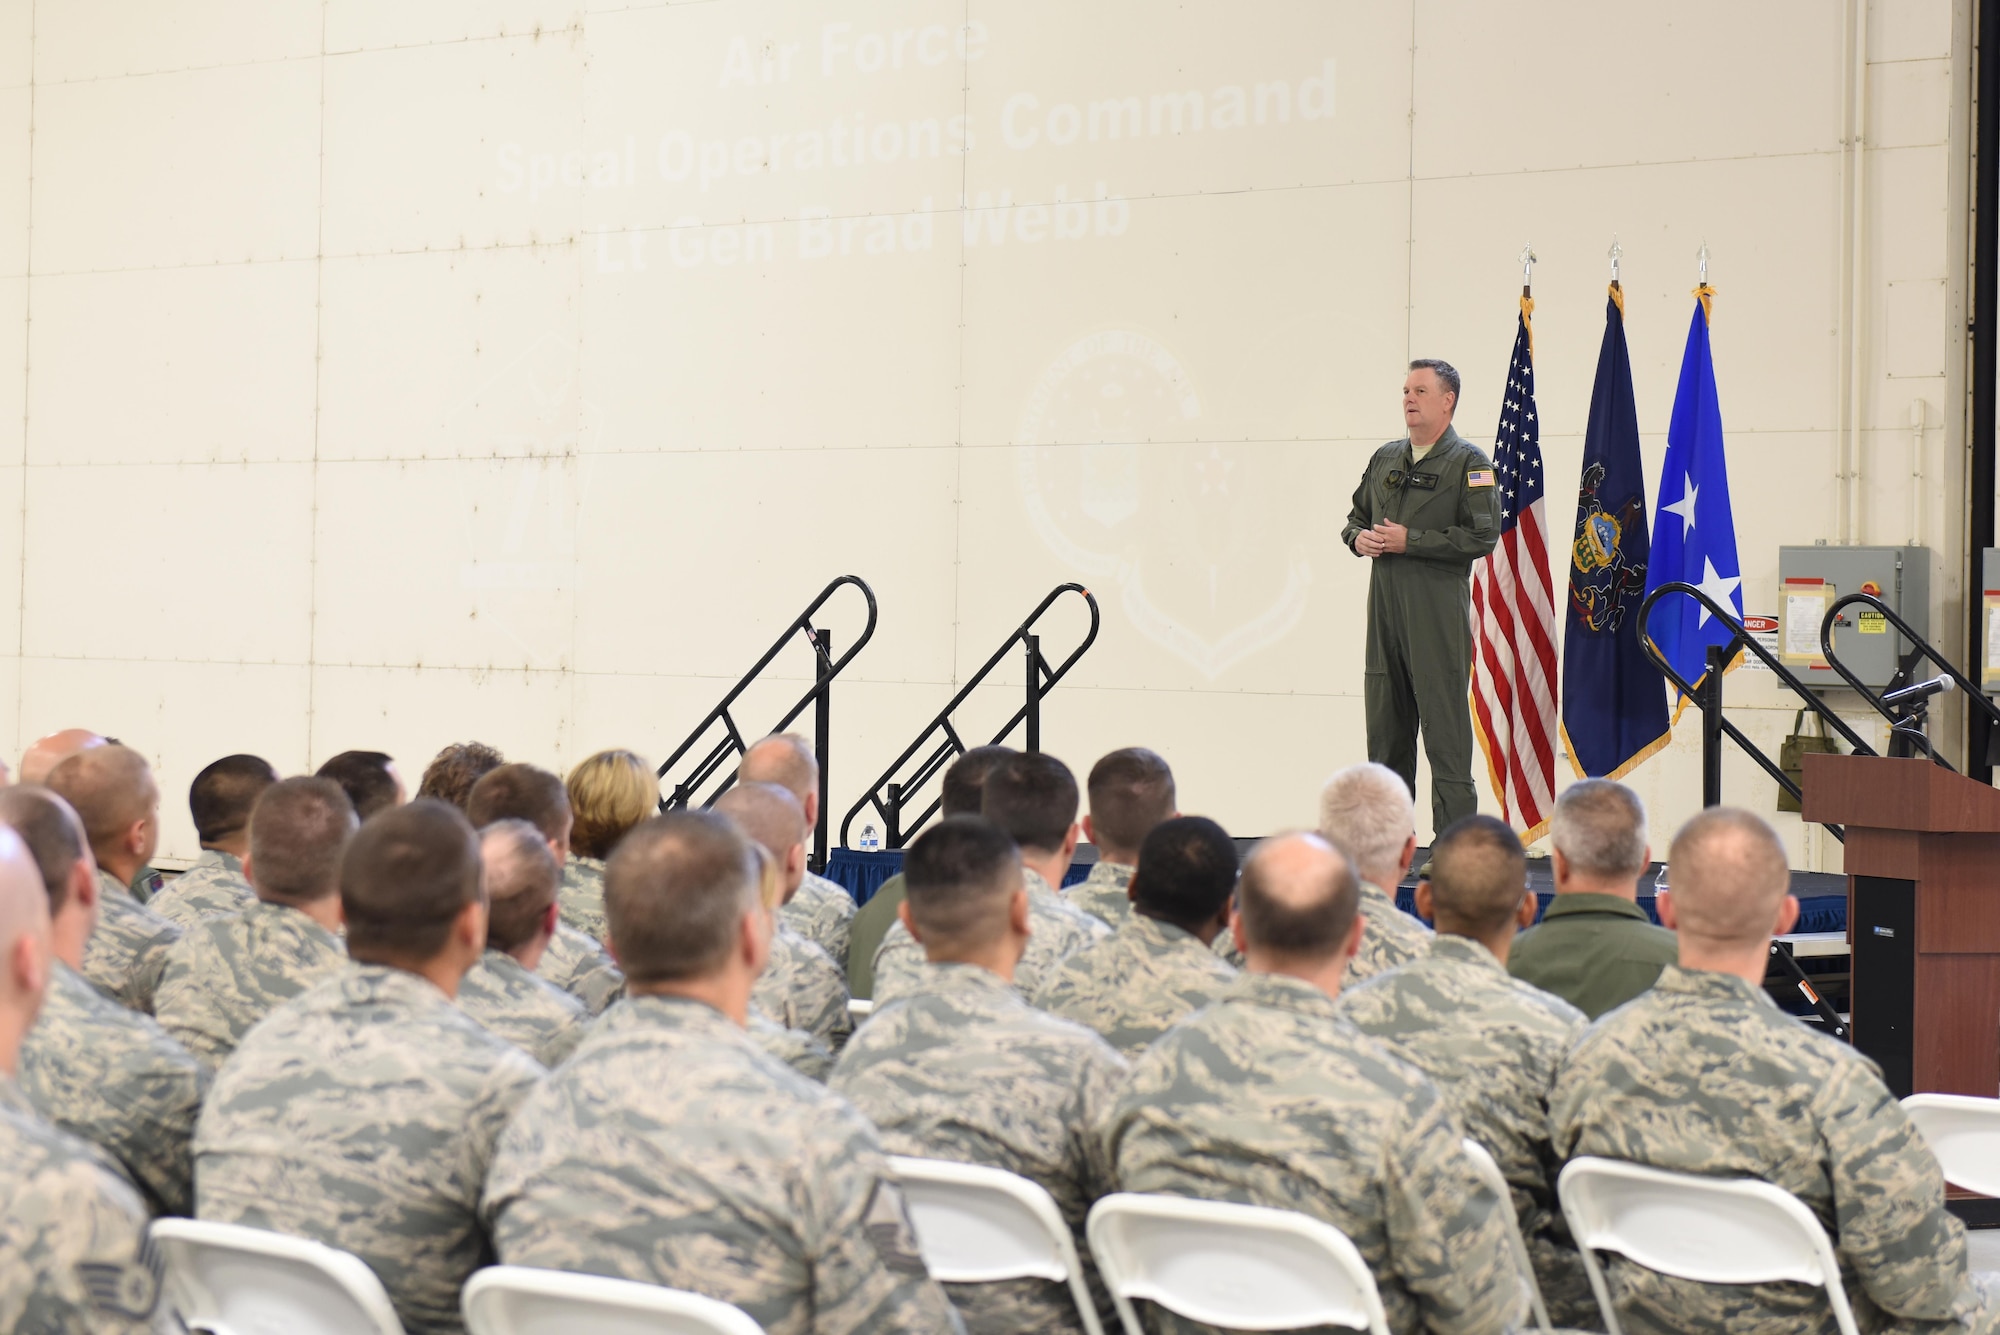 U.S. Air Force Lt. Gen. Brad Webb, commander of Air Force Special Operations Command, addresses Airmen of the 193rd Special Operations Wing during an “All Call” held on base during his visit, June 10, 2017.  Webb spoke on a variety of topics including the vison, mission and priorities of AFSOC; AFSOC’s strategic value to the nation; and the wing’s spectrum of conflict. Webb also personally recognized six award-winning members of the wing for their outstanding efforts throughout the year. He concluded the “All Call” by taking questions from the Airmen in attendance. (U.S. Air National Guard photo by Tech. Sgt. Claire Behney/Released)